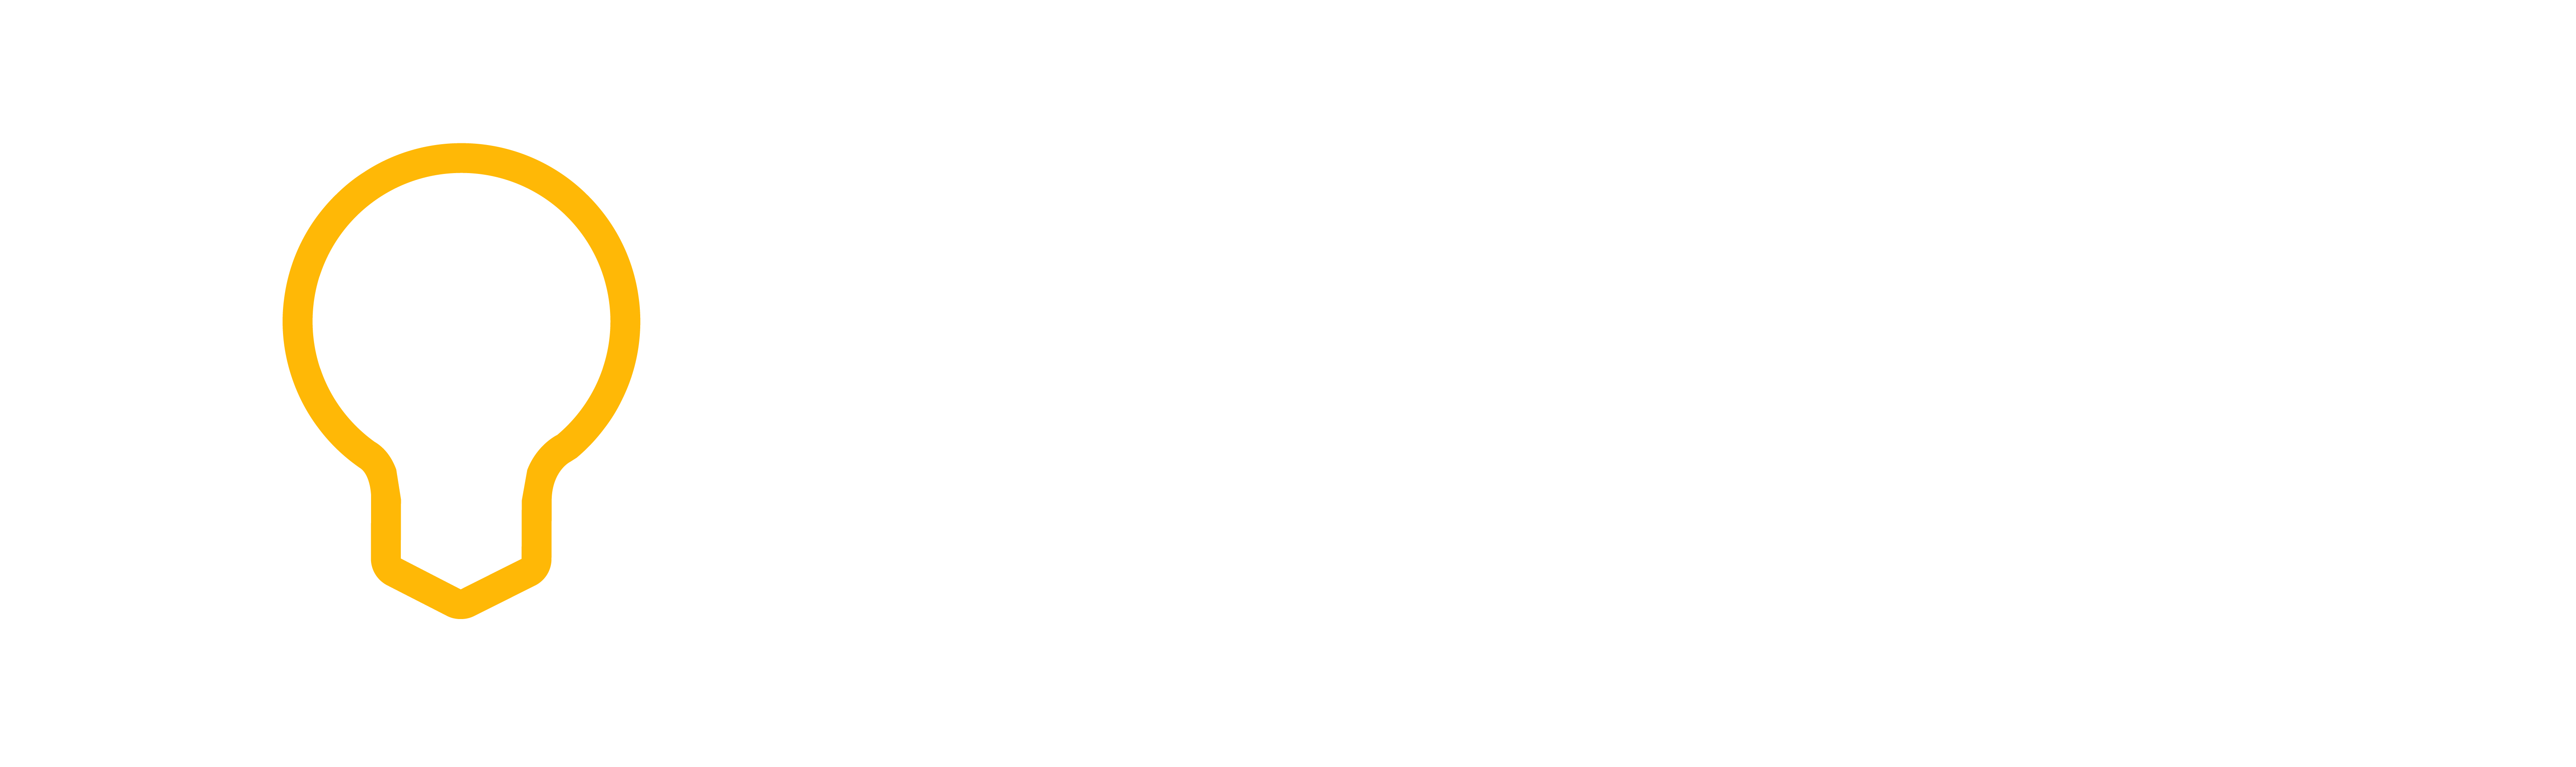 BHIVE Workspace PNG LOGO